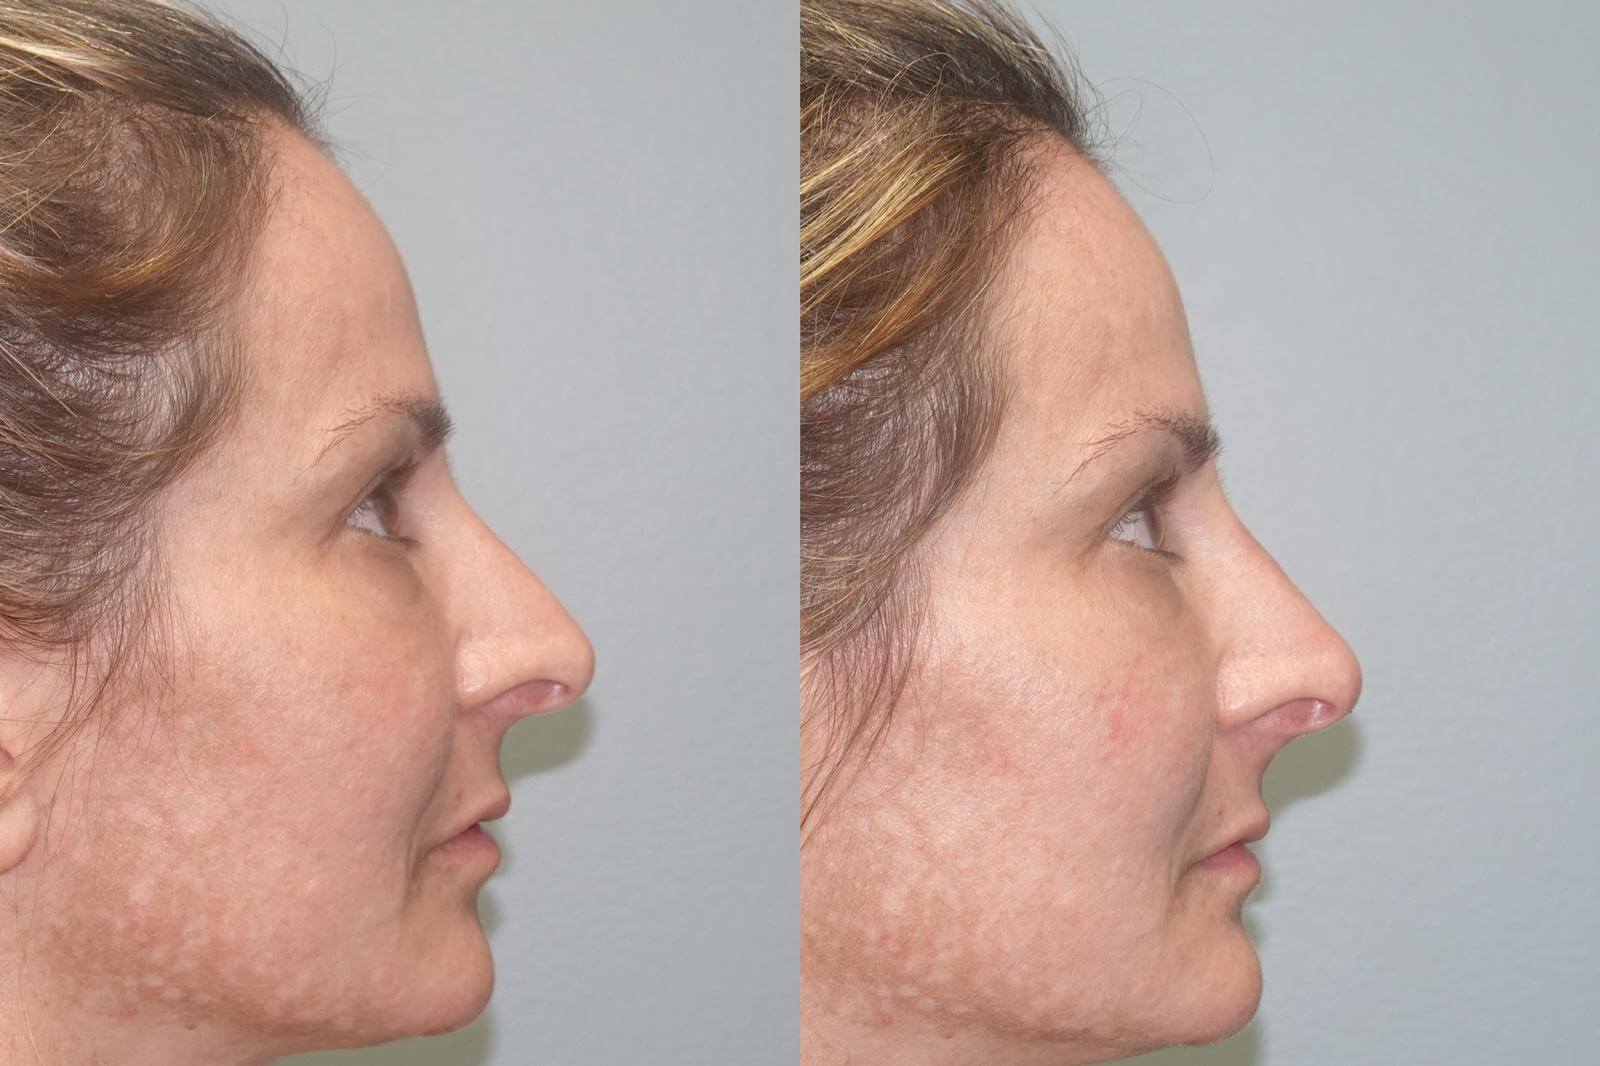 Before and After Nonsurgical nose job with 1/2 syringe of Belafill to correct facial asymmetry